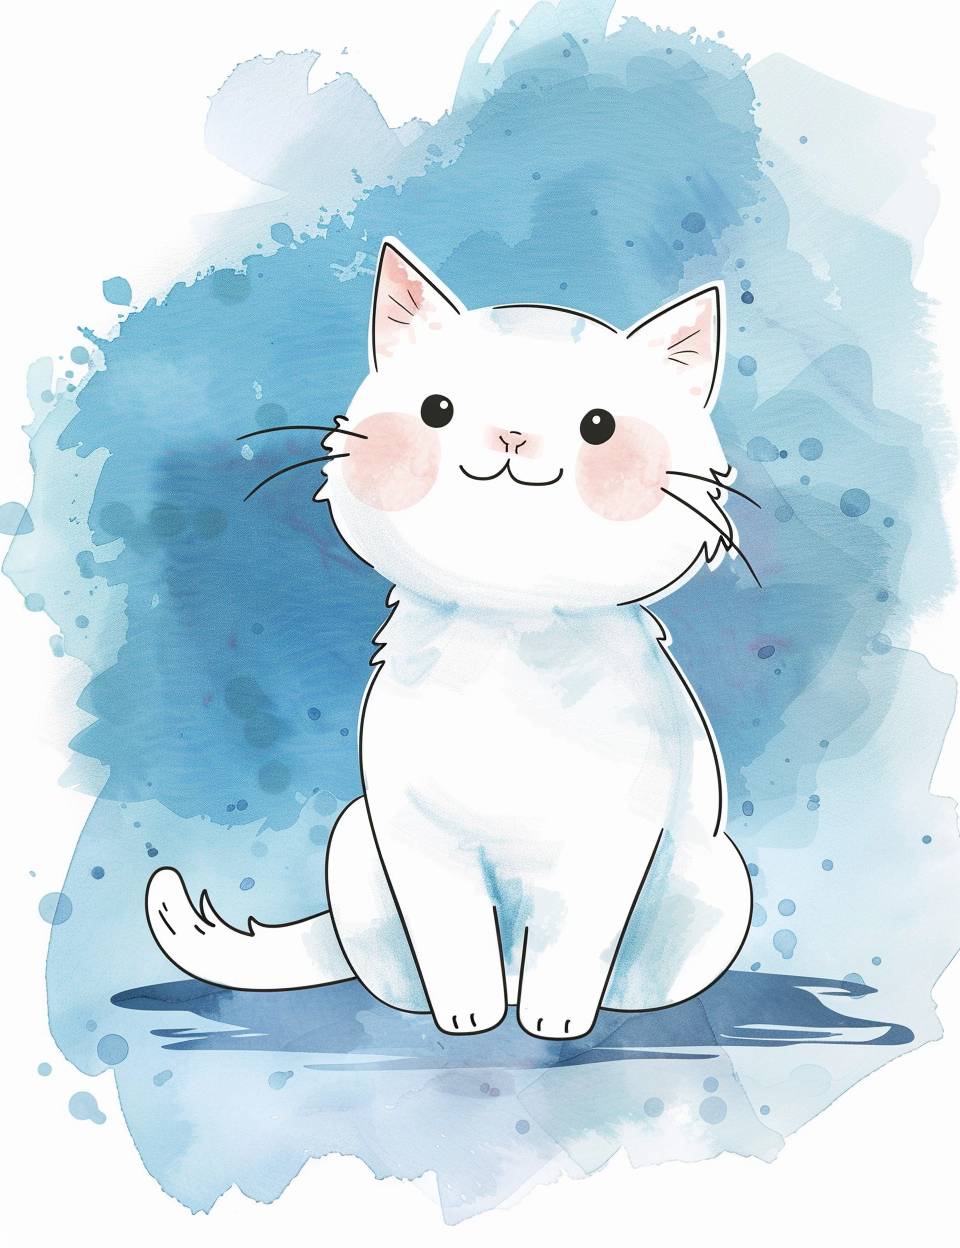 A cute cartoon white cat with a blue watercolor background sticker, a simple flat illustration in the style of Henri Matisse and Ryo Takemasa.